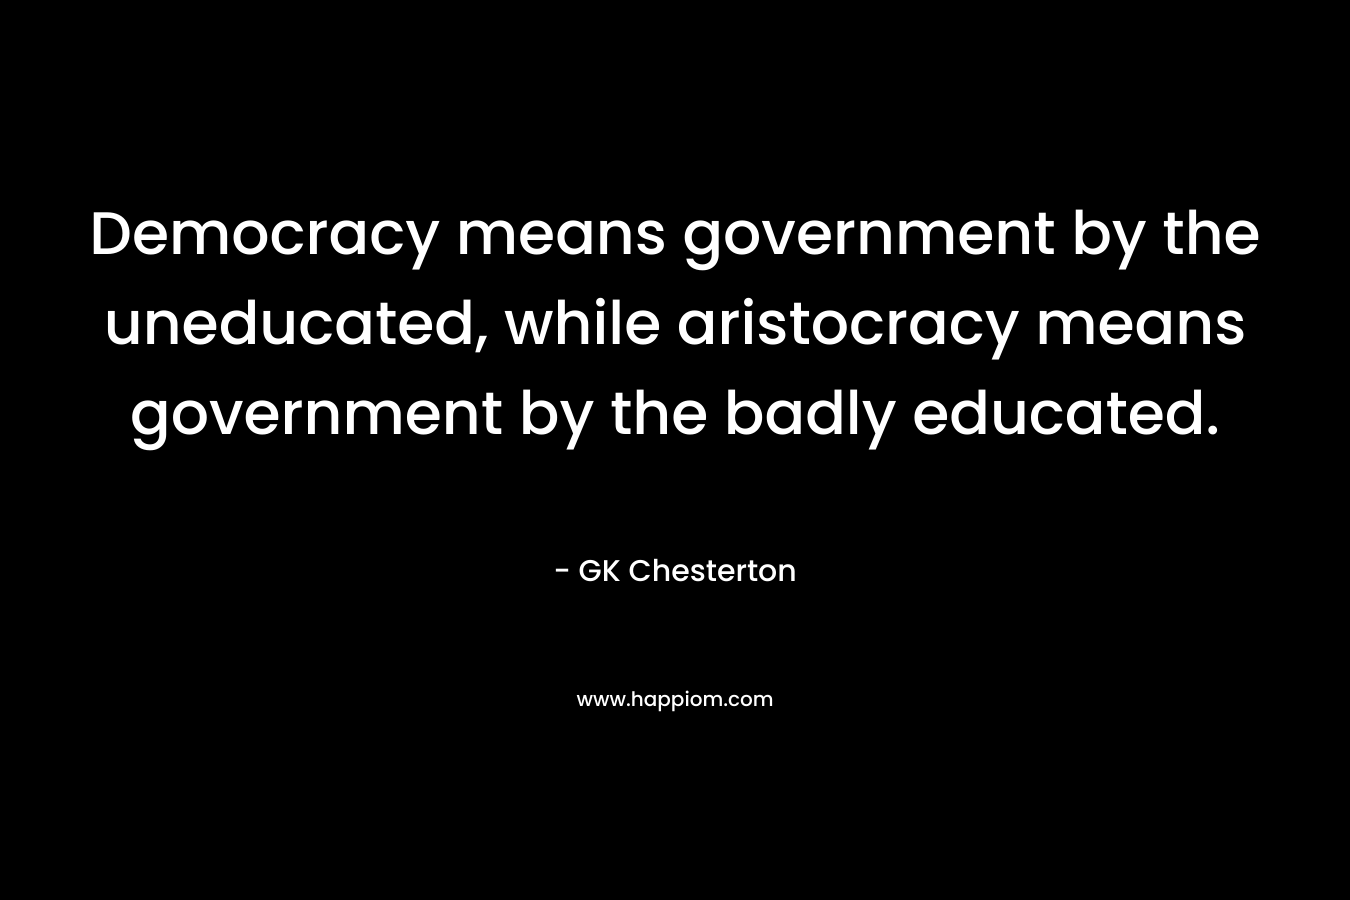 Democracy means government by the uneducated, while aristocracy means government by the badly educated. – GK Chesterton